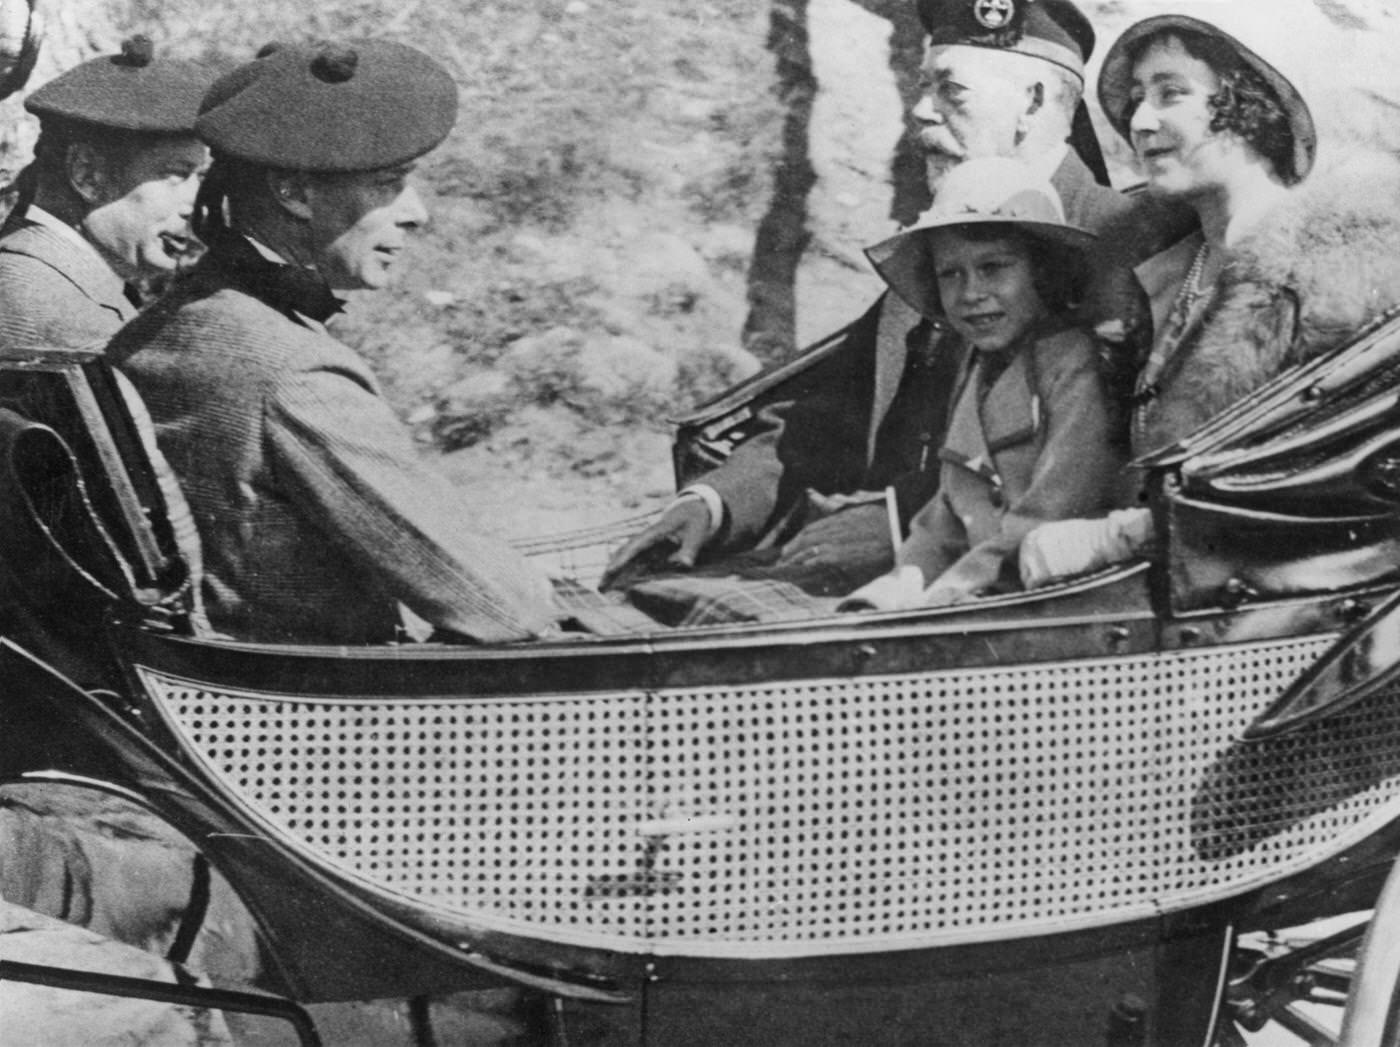 Queen Elizabeth II in a carriage with King George V and her parents, the Duke and Duchess of York (later King George VI and Queen Elizabeth), 1933.